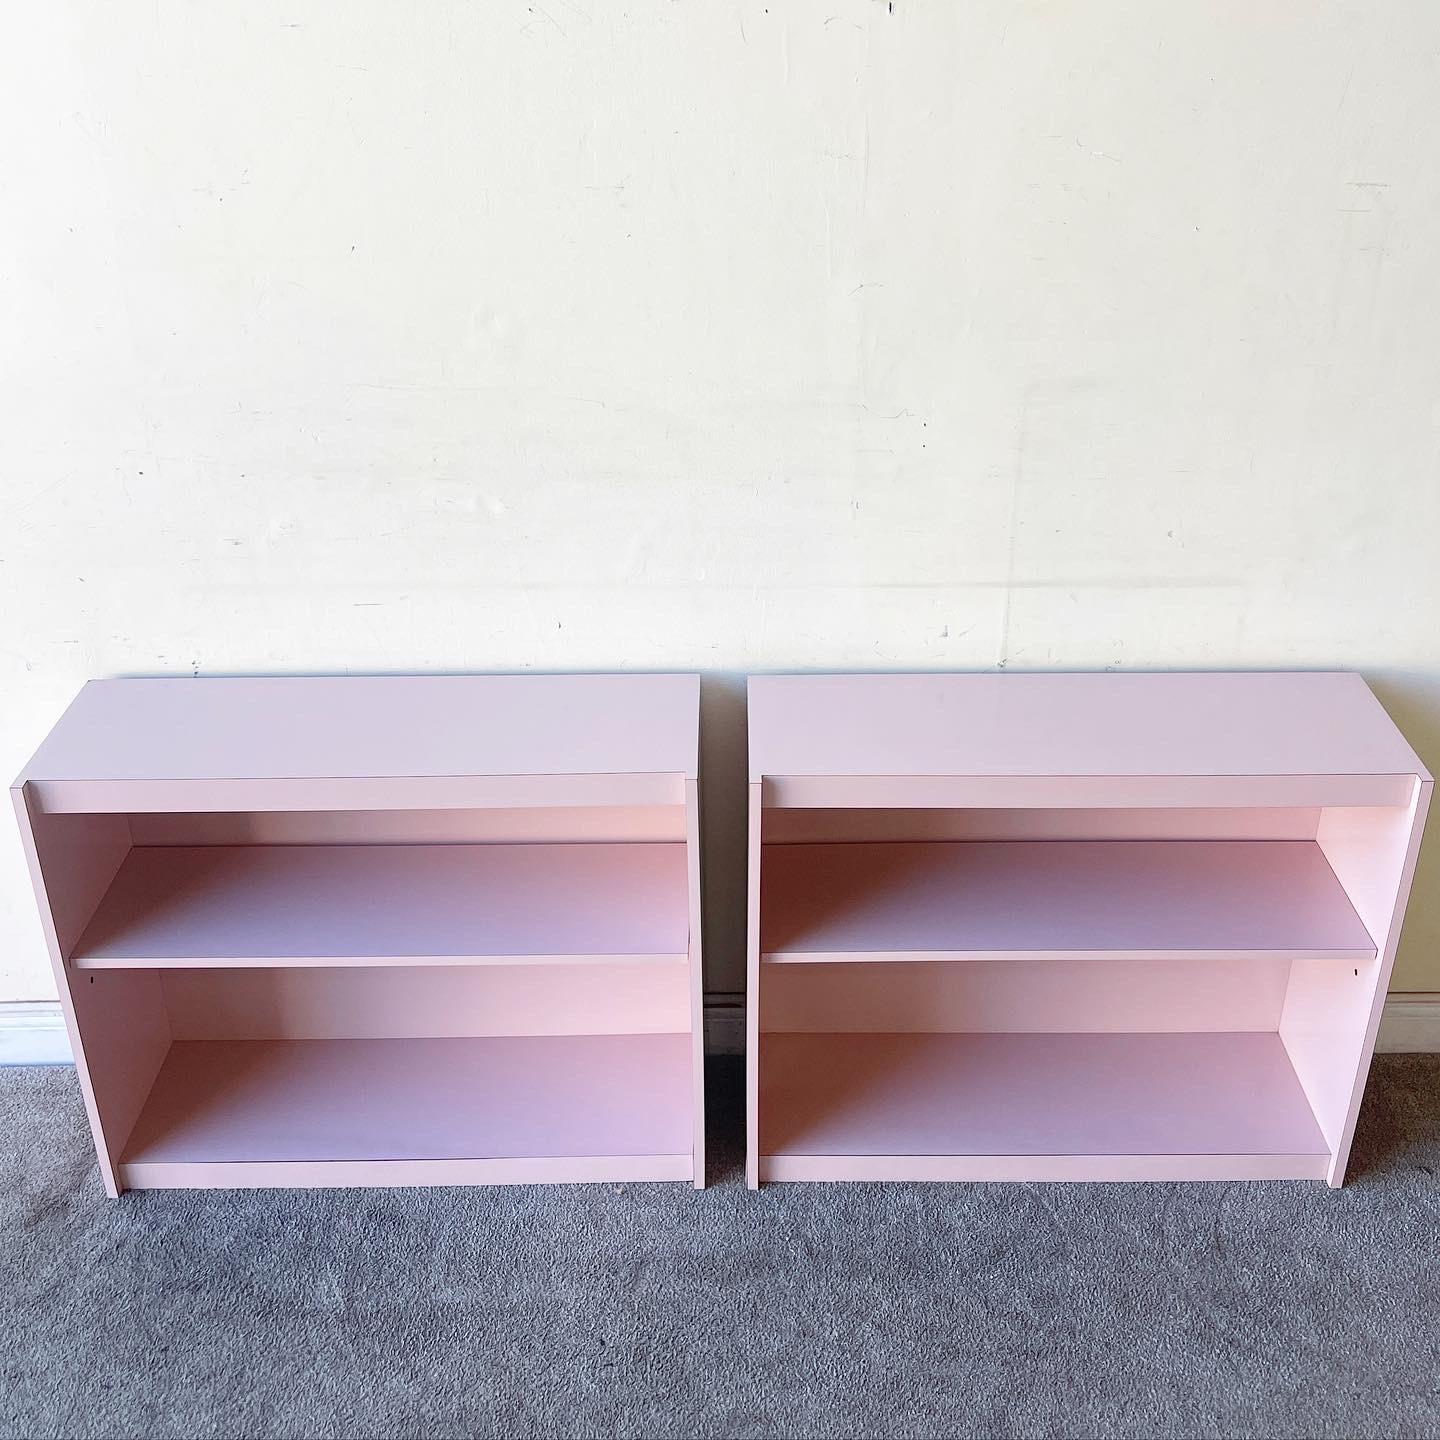 Amazing pair of postmodern bookshelves. Each feature a pink lacquer laminate and one central shelf.
 